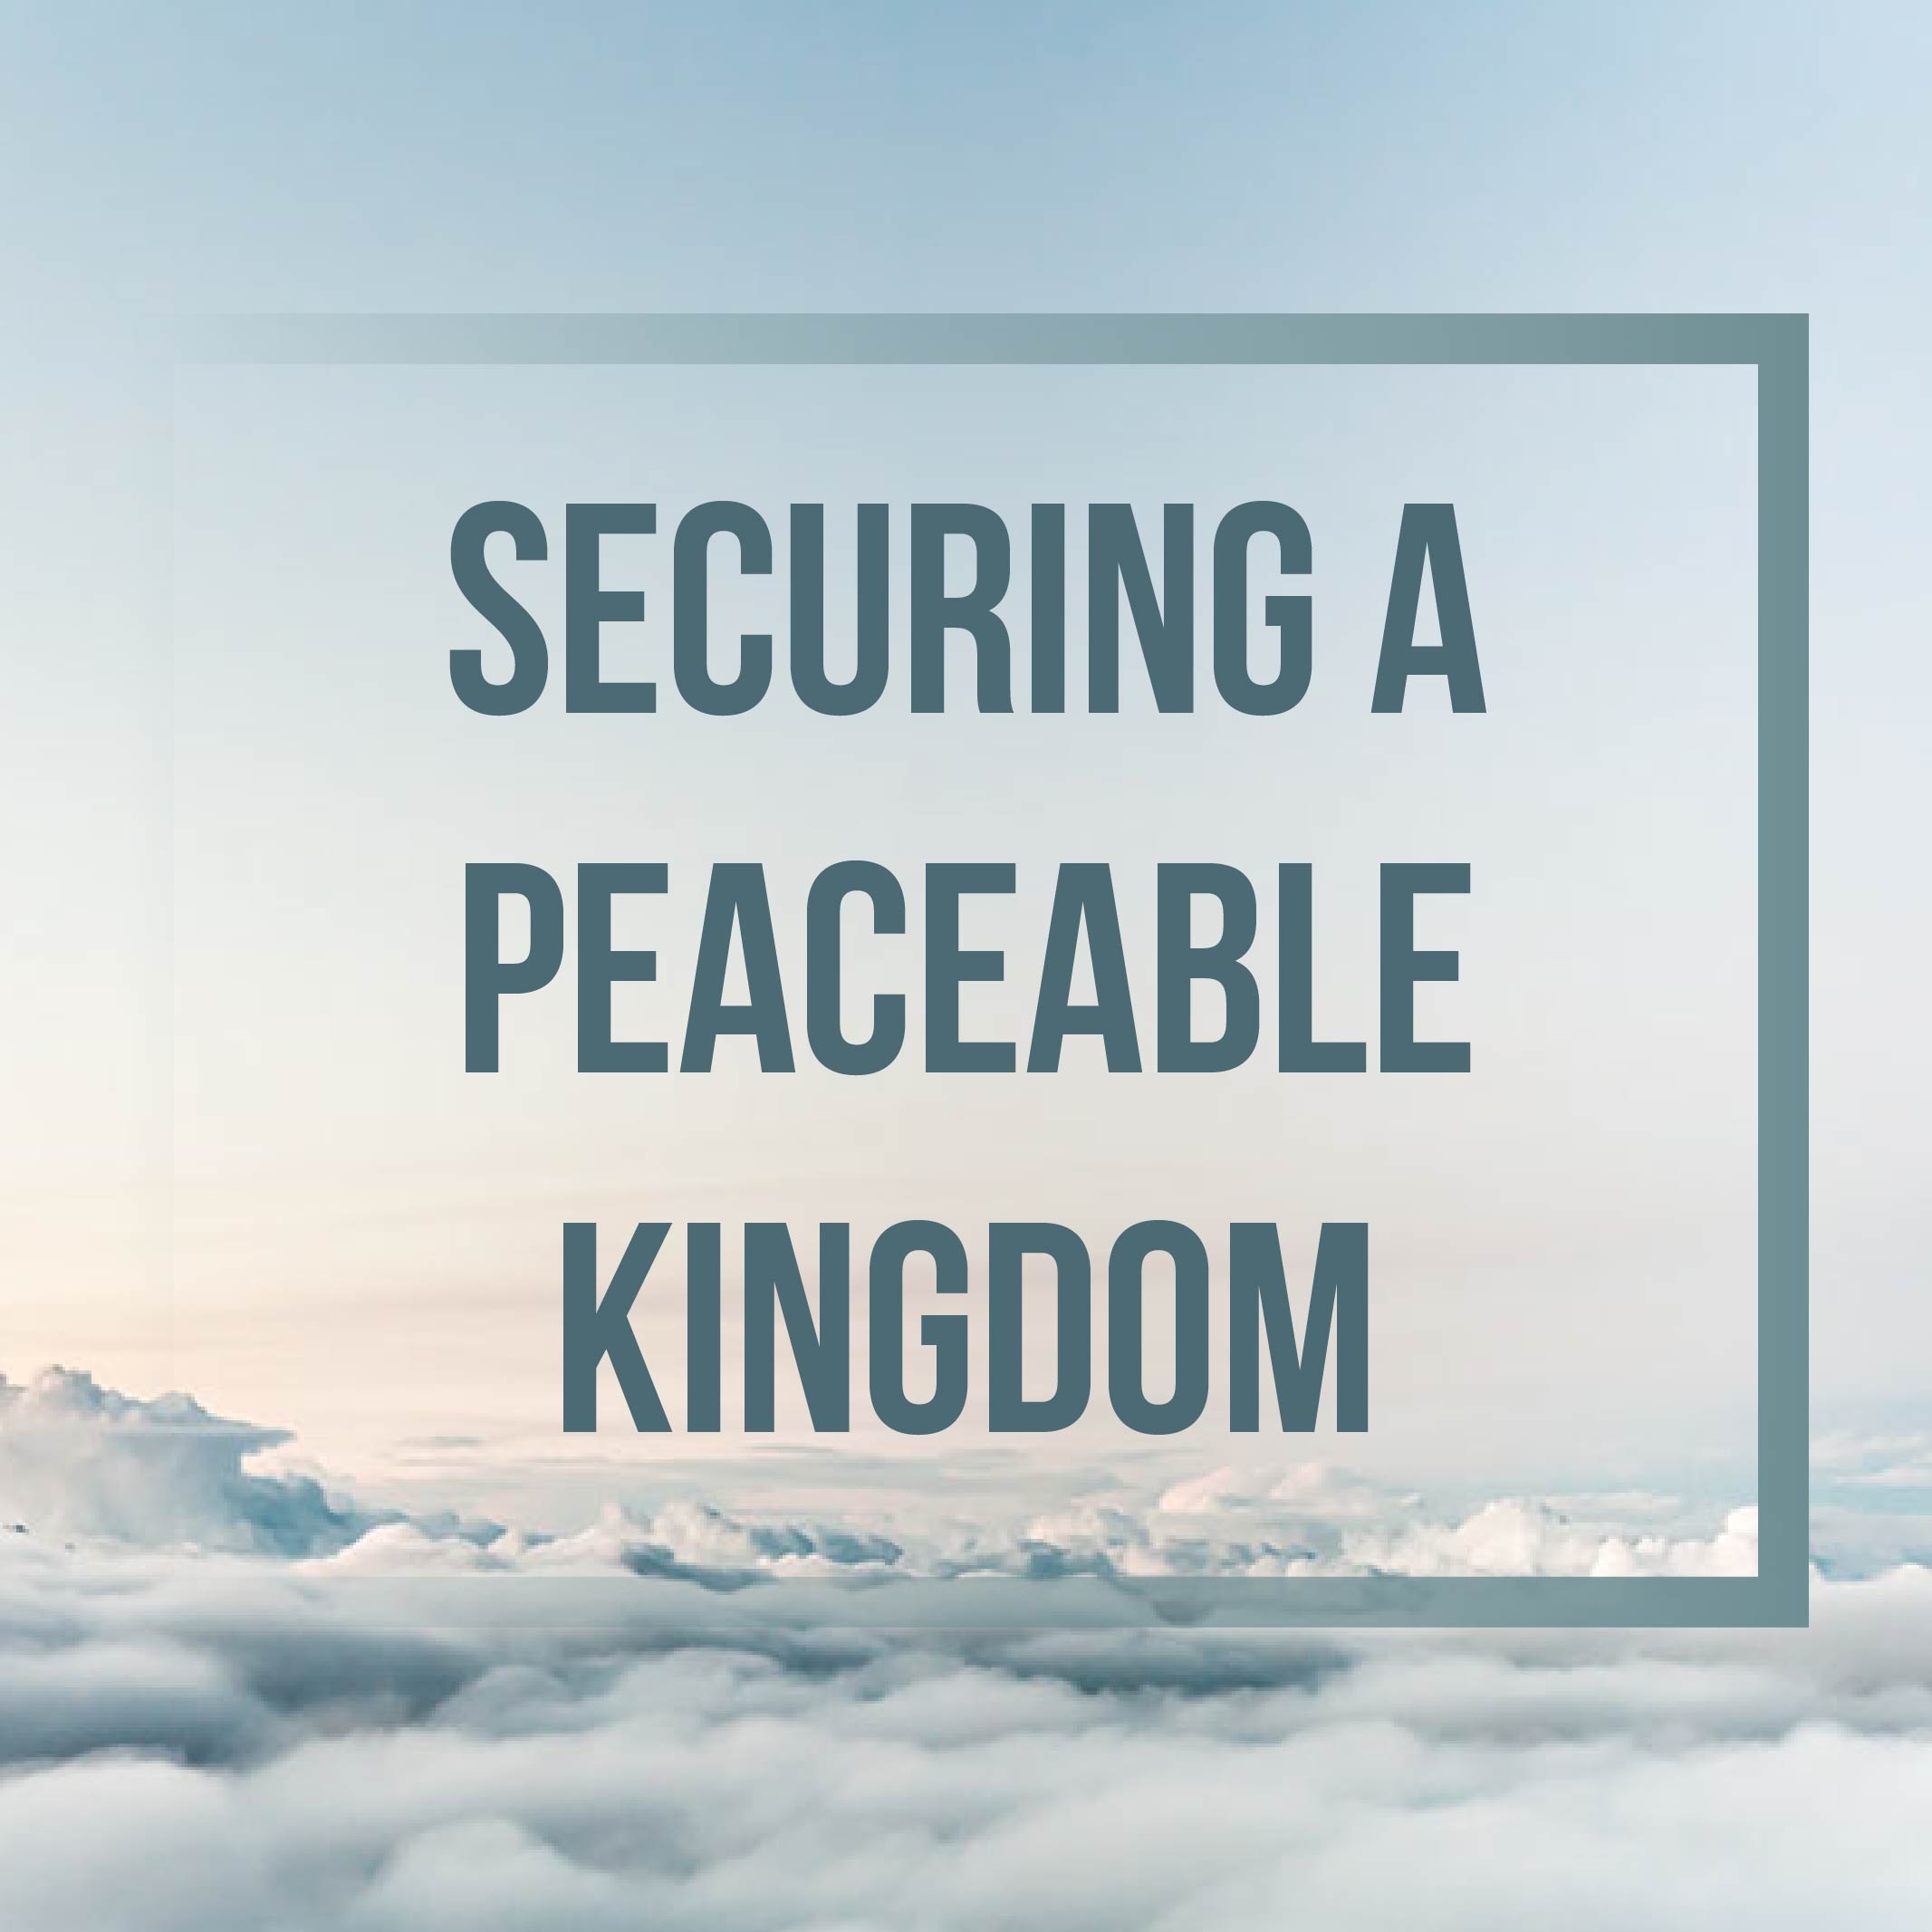 Securing a Peaceable Kingdom